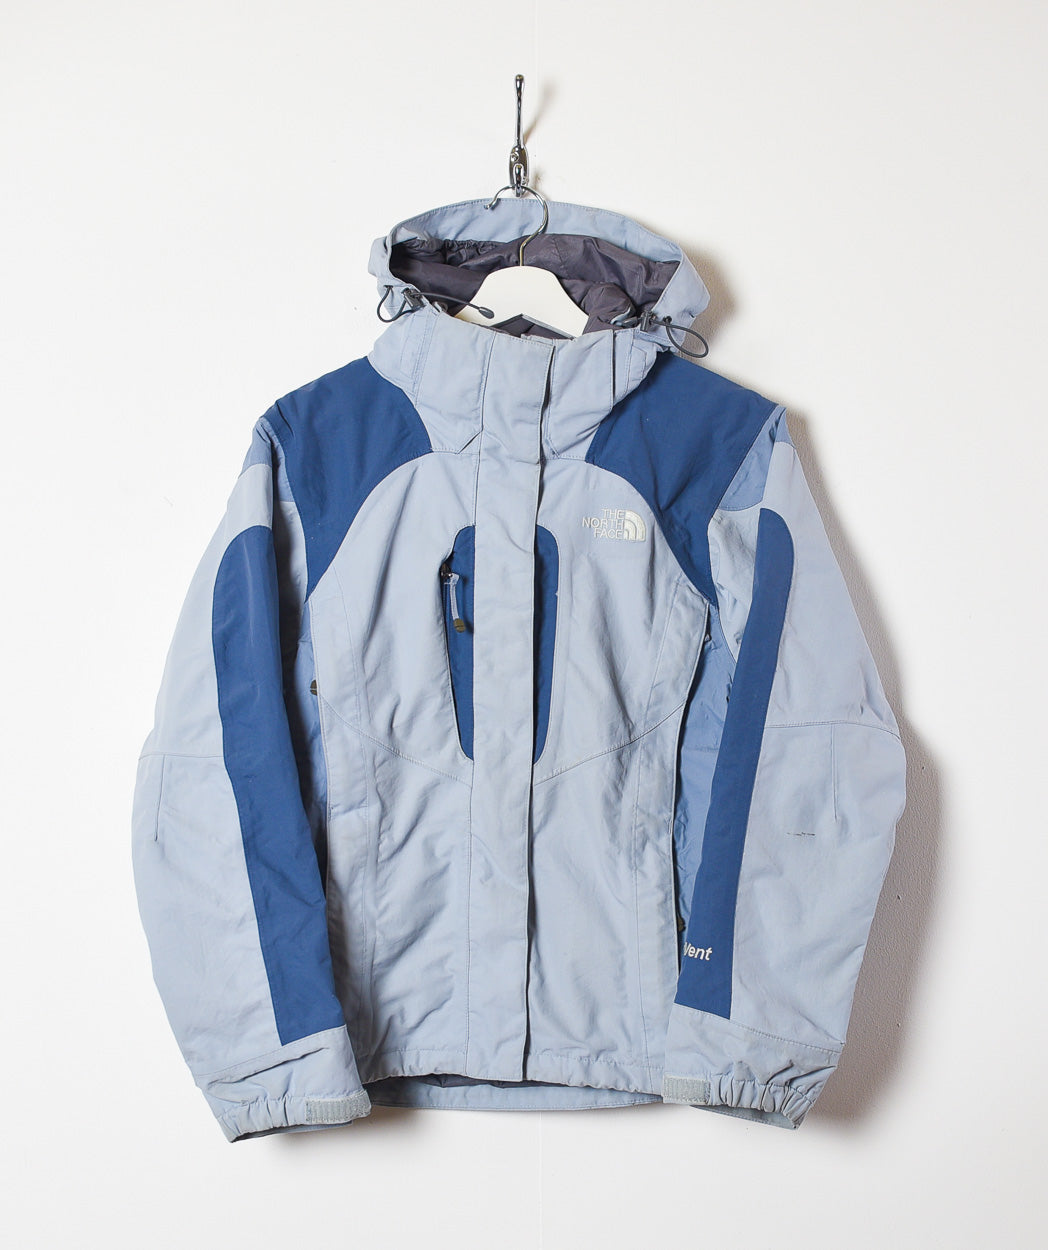 Baby The North Face Women's Hyvent Hooded Jacket - X-Small 